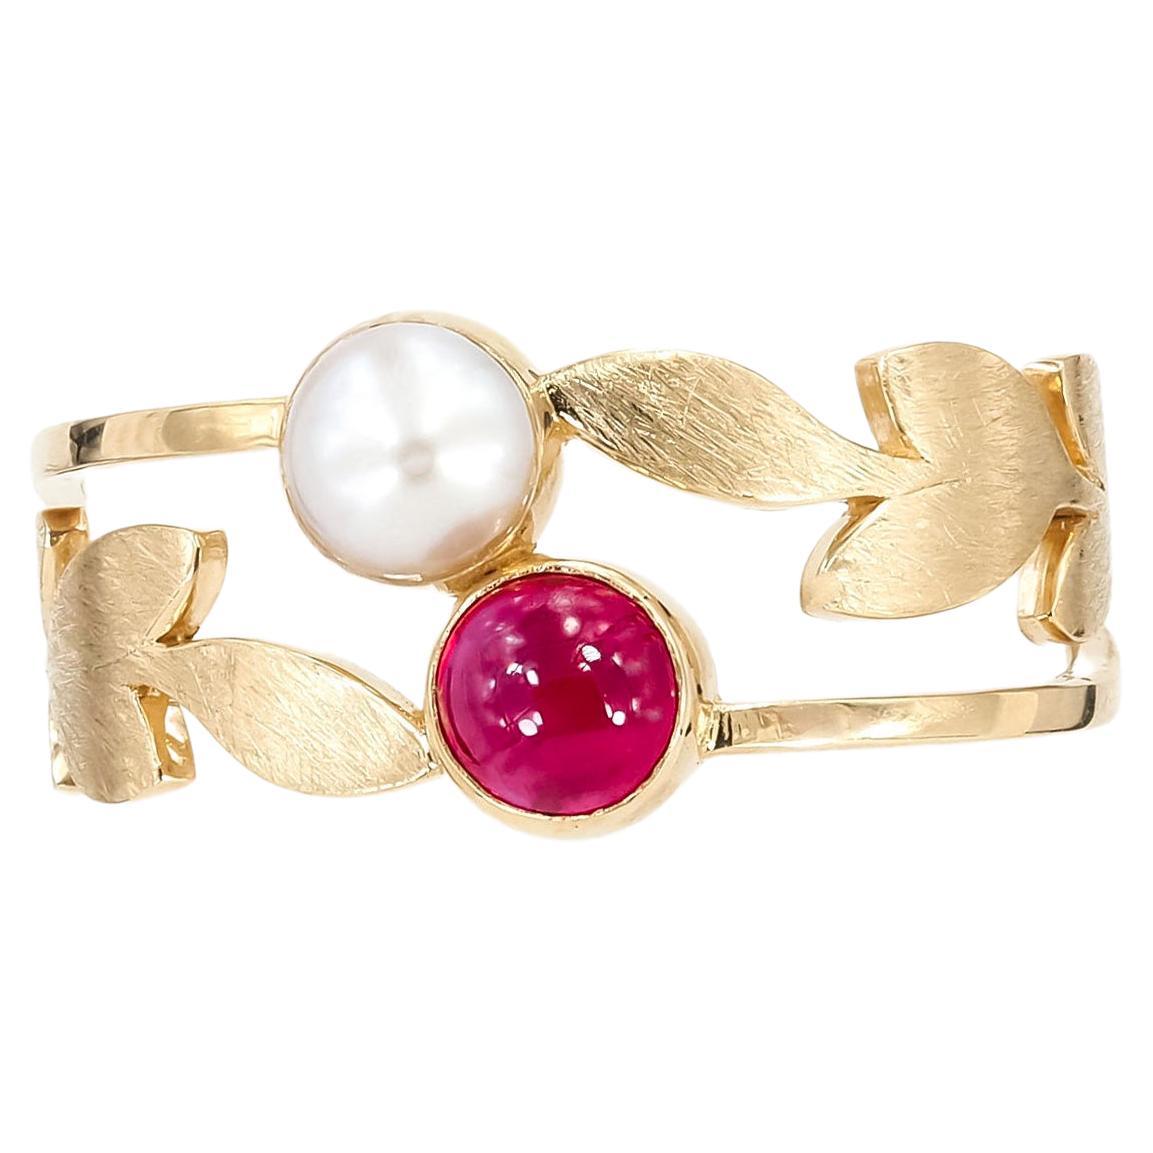 14k gold ring with ruby and pearl

total weight 2.35 gr

Gemstones (all are tested by proffesional gemmologist)

Ruby
round  cabochon cut, 0.5 ct, transparent, red color. 

Freshwater cultivated pearls - 5 mm., white color, button form450